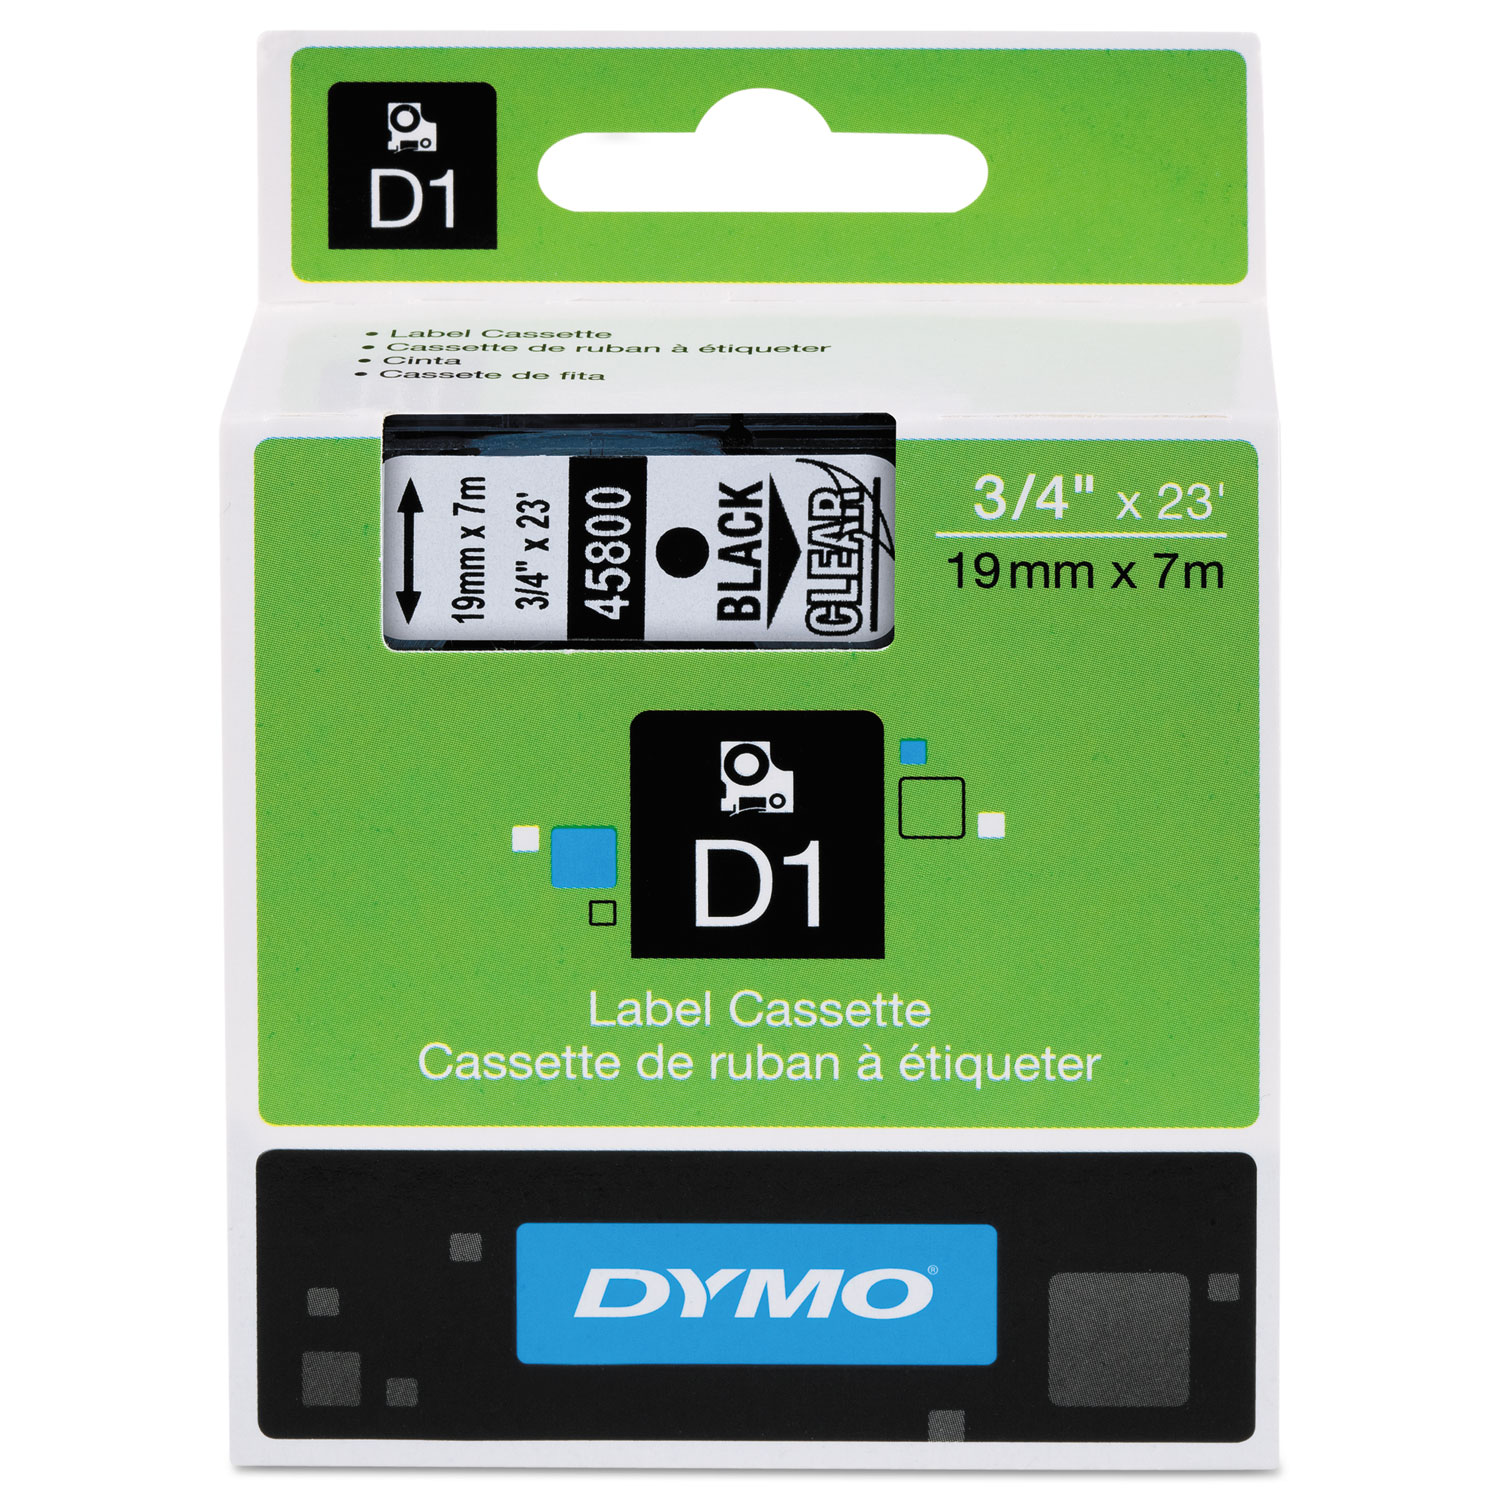 DYMO DYM45800 D1 High-Performance Polyester Removable Label Tape, 3/4" x 23 ft, Black on Clear